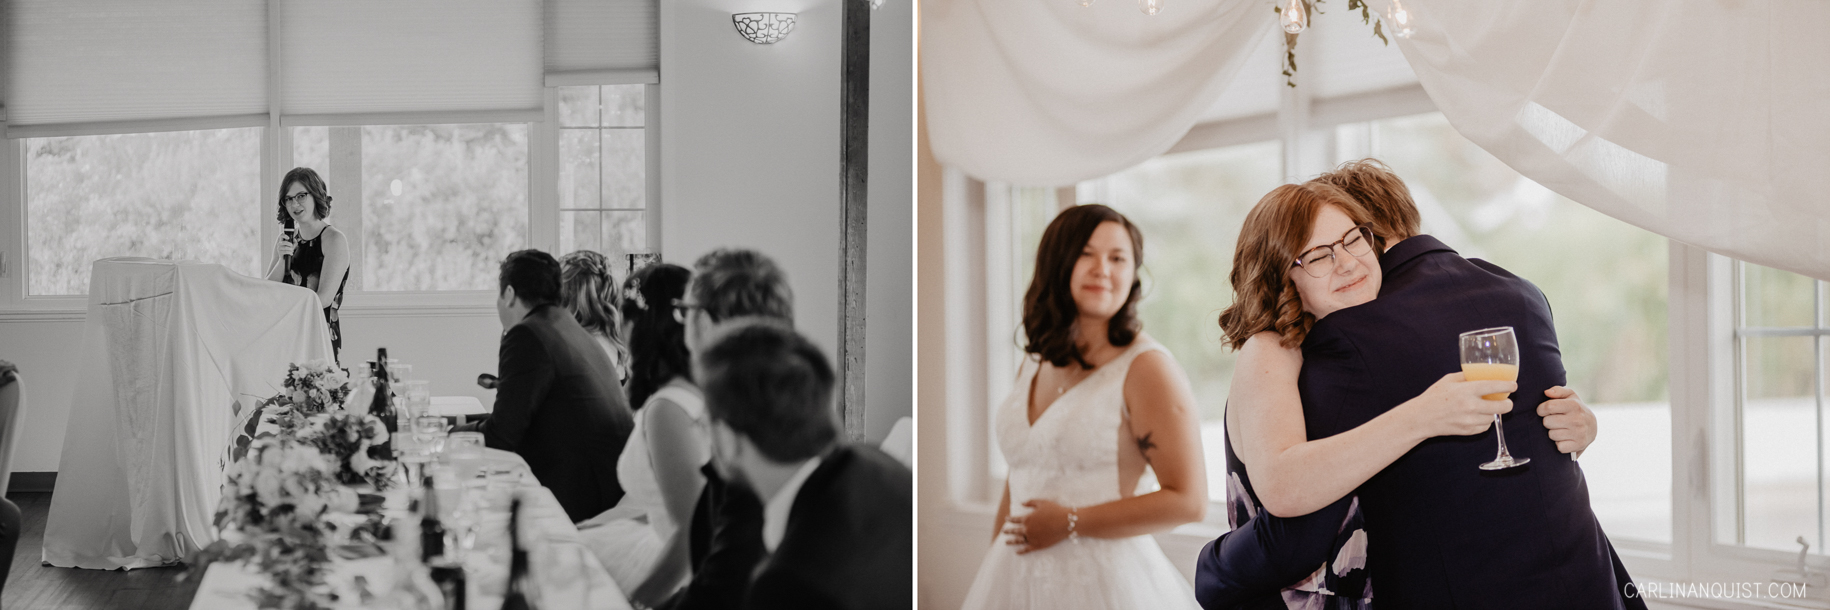 Wedding Toast to the Bride | Bowness Scout Hall Wedding